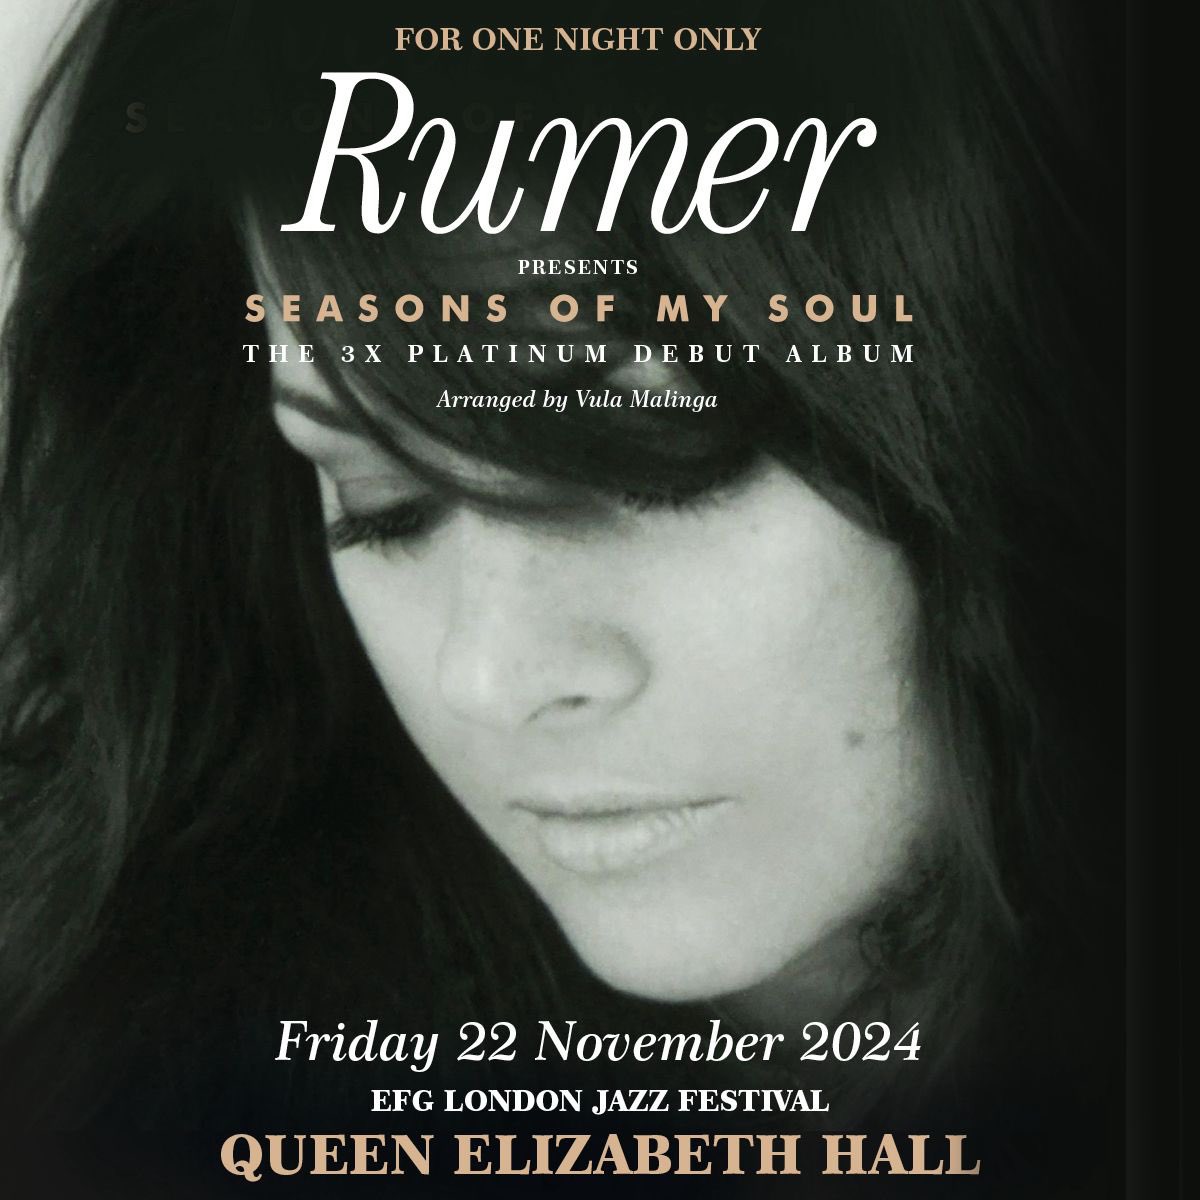 Delighted to announce a very special performance of the Seasons of My Soul album arranged and musically directed by @Vulavox 🎶 for @LondonJazzFest November 22nd Tickets will be on sale this Friday at 10am gigst.rs/rumer